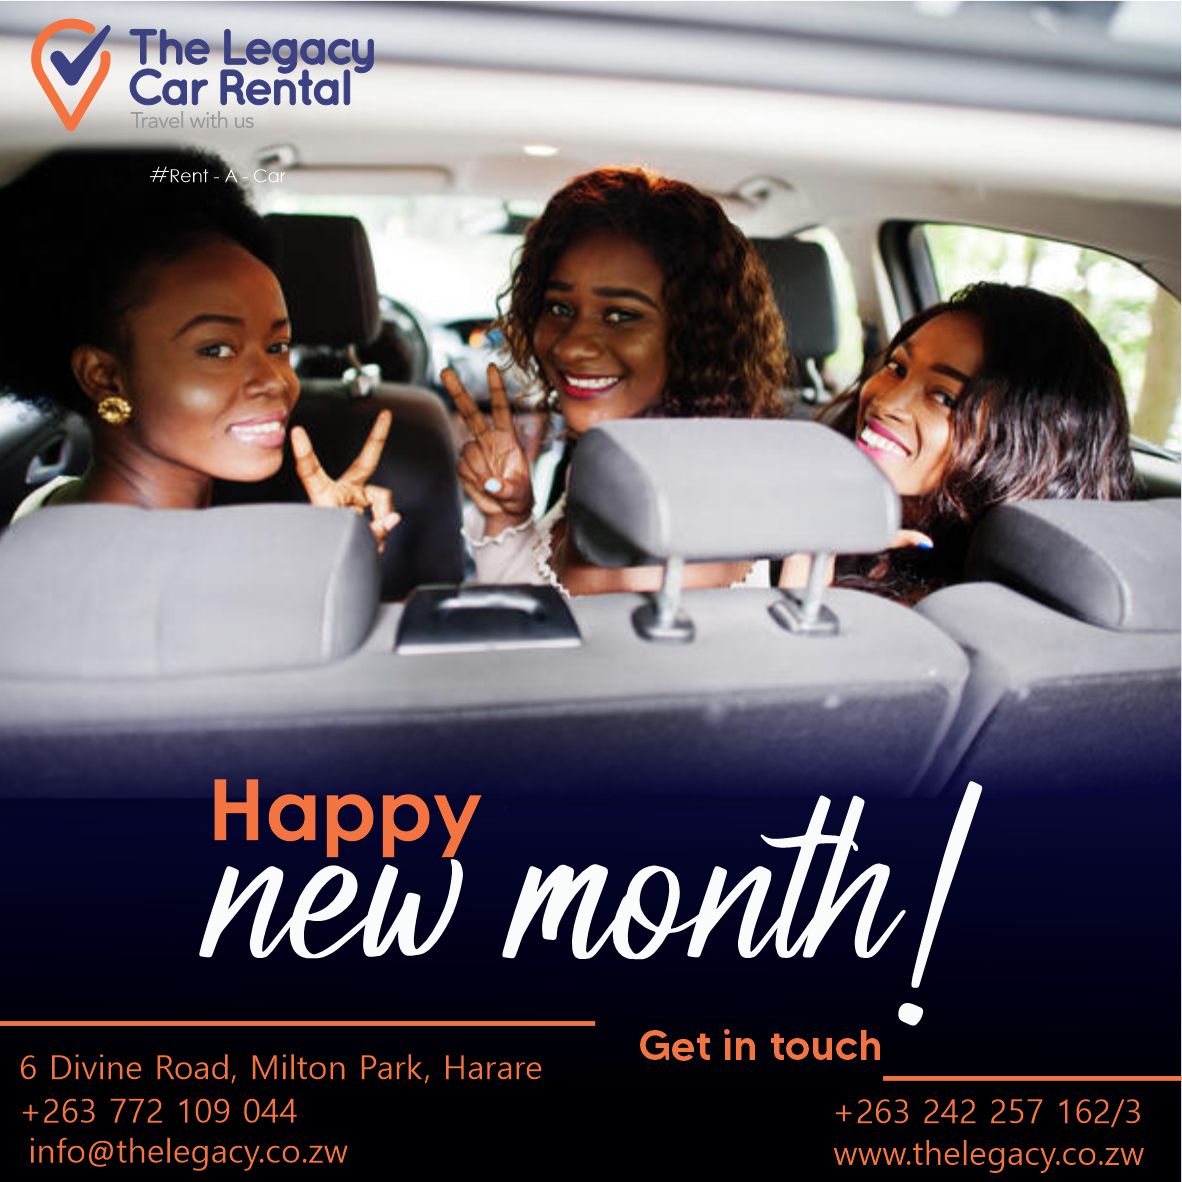 Happy New Month. Travel with Us!
#newmonth #HappyNewMonth #WeAreHere #Bulawayo #grouptrip #carrental #always #ChauffeurDrive #rent #smile #chauffeur #carhire #vehicle #yeswecan #hire #travel #booknow #december #travelwithus #choose #us #rental #legacy #chooseus #chauffuerservice